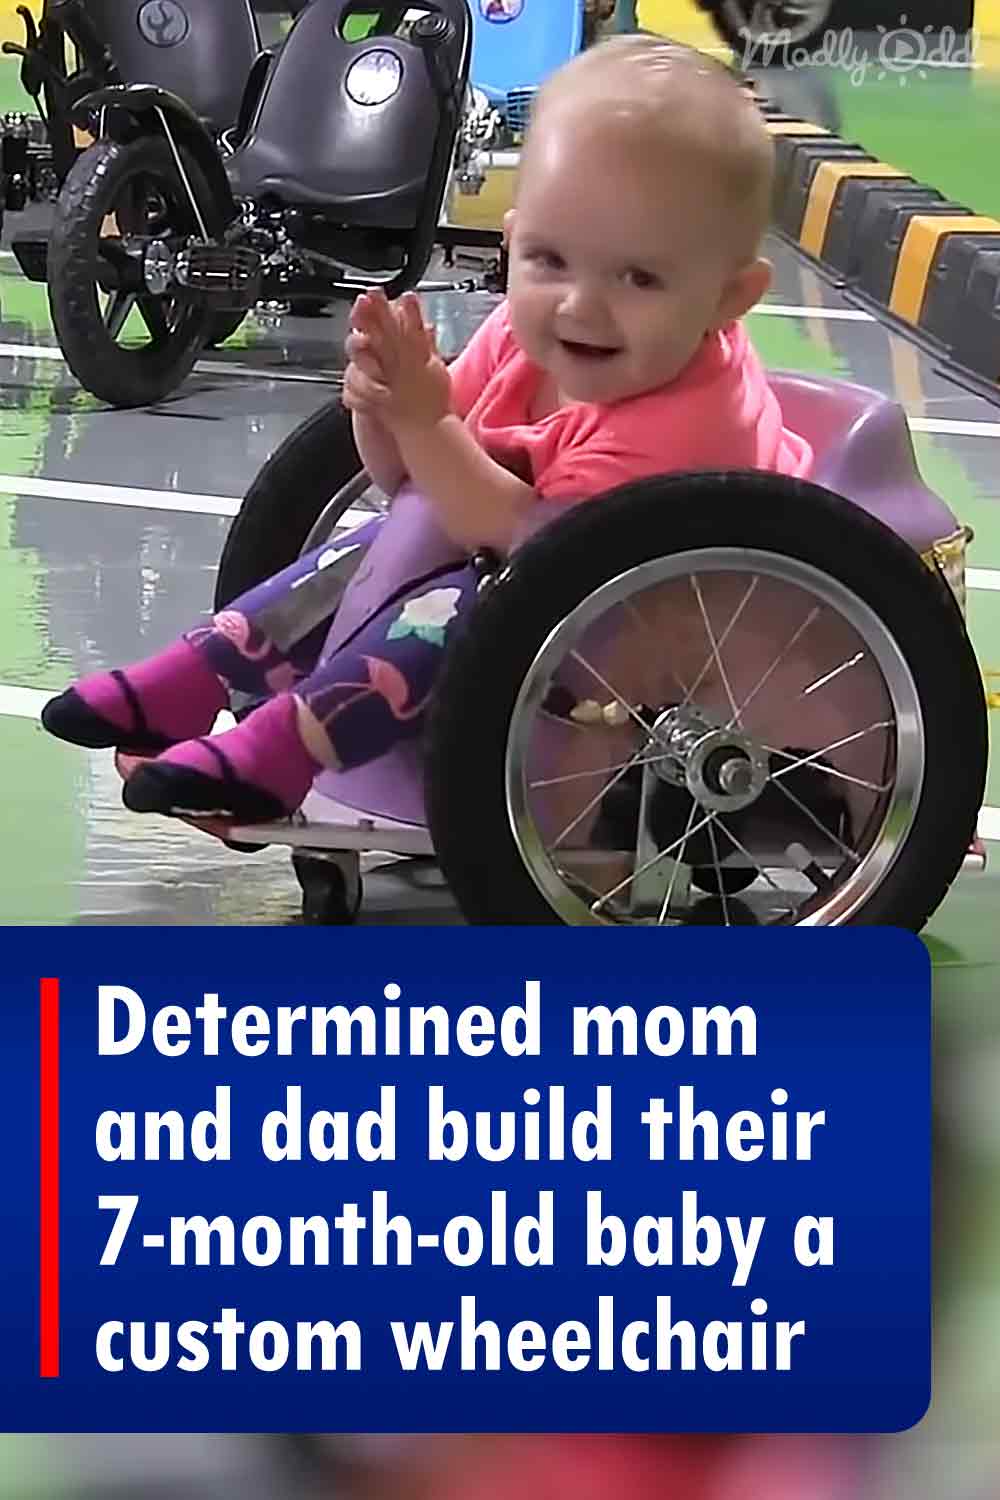 Determined mom and dad build their 7-month-old baby a custom wheelchair